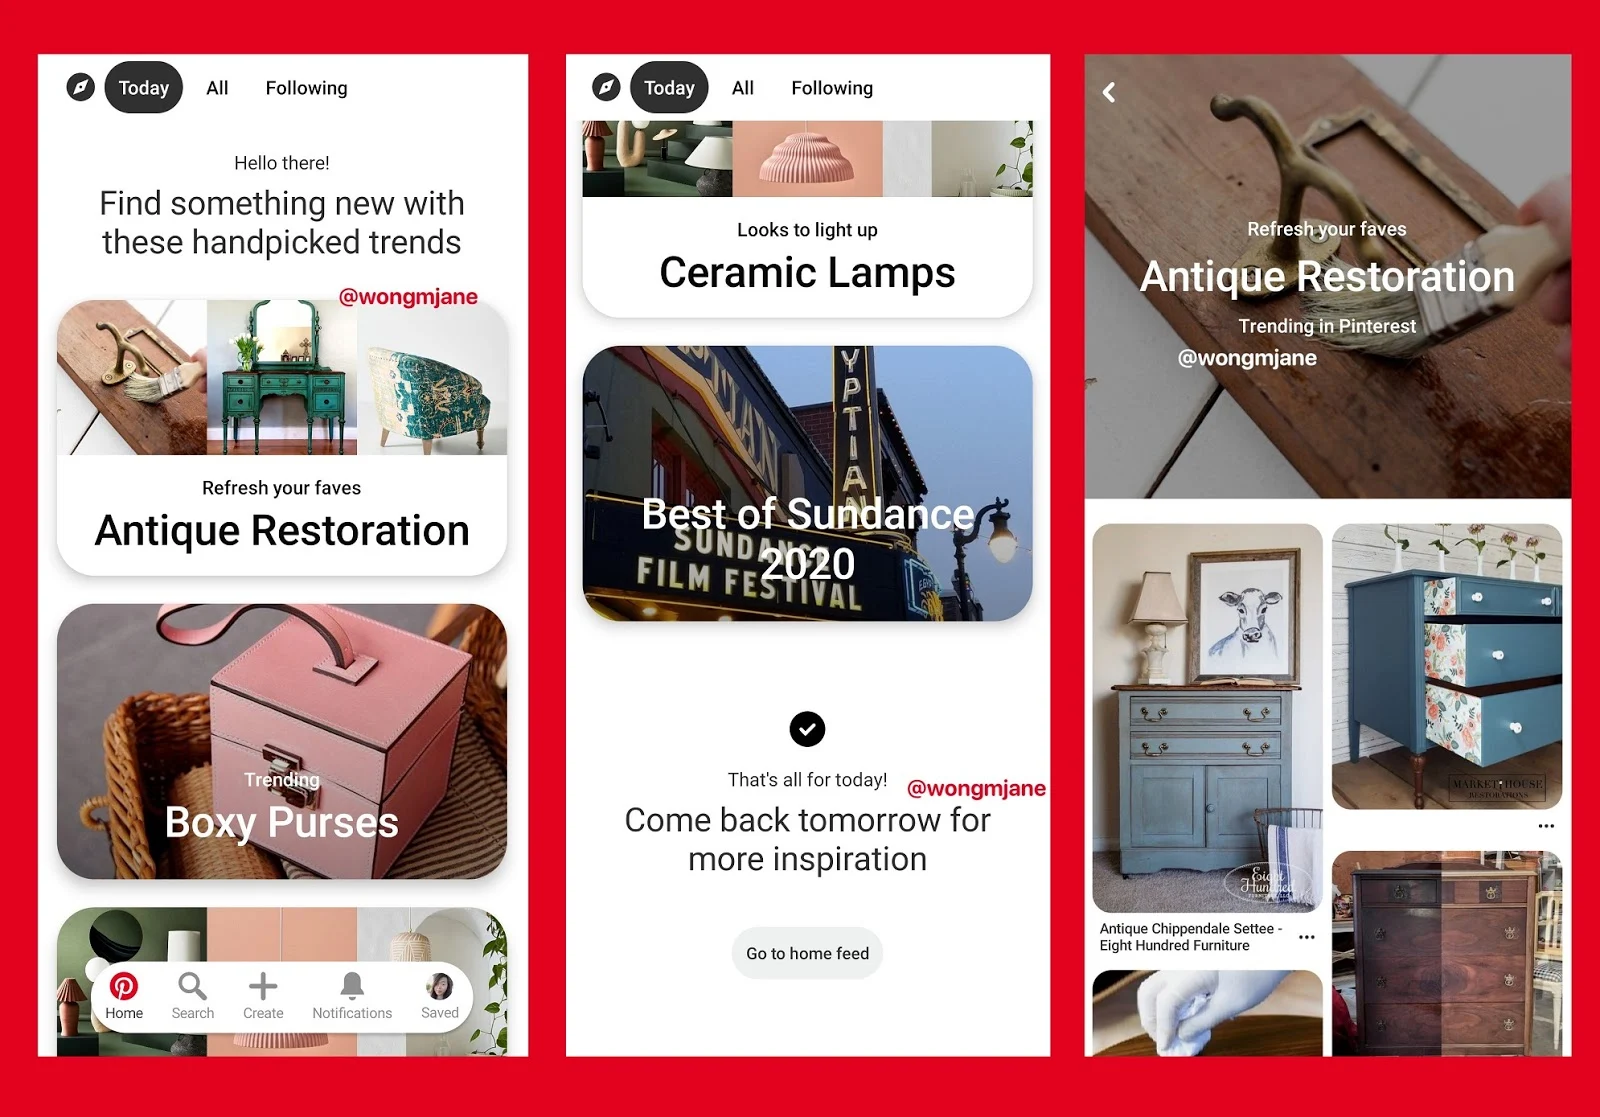 Pinterest Is Working On Today Feed For Handpicked Trends 